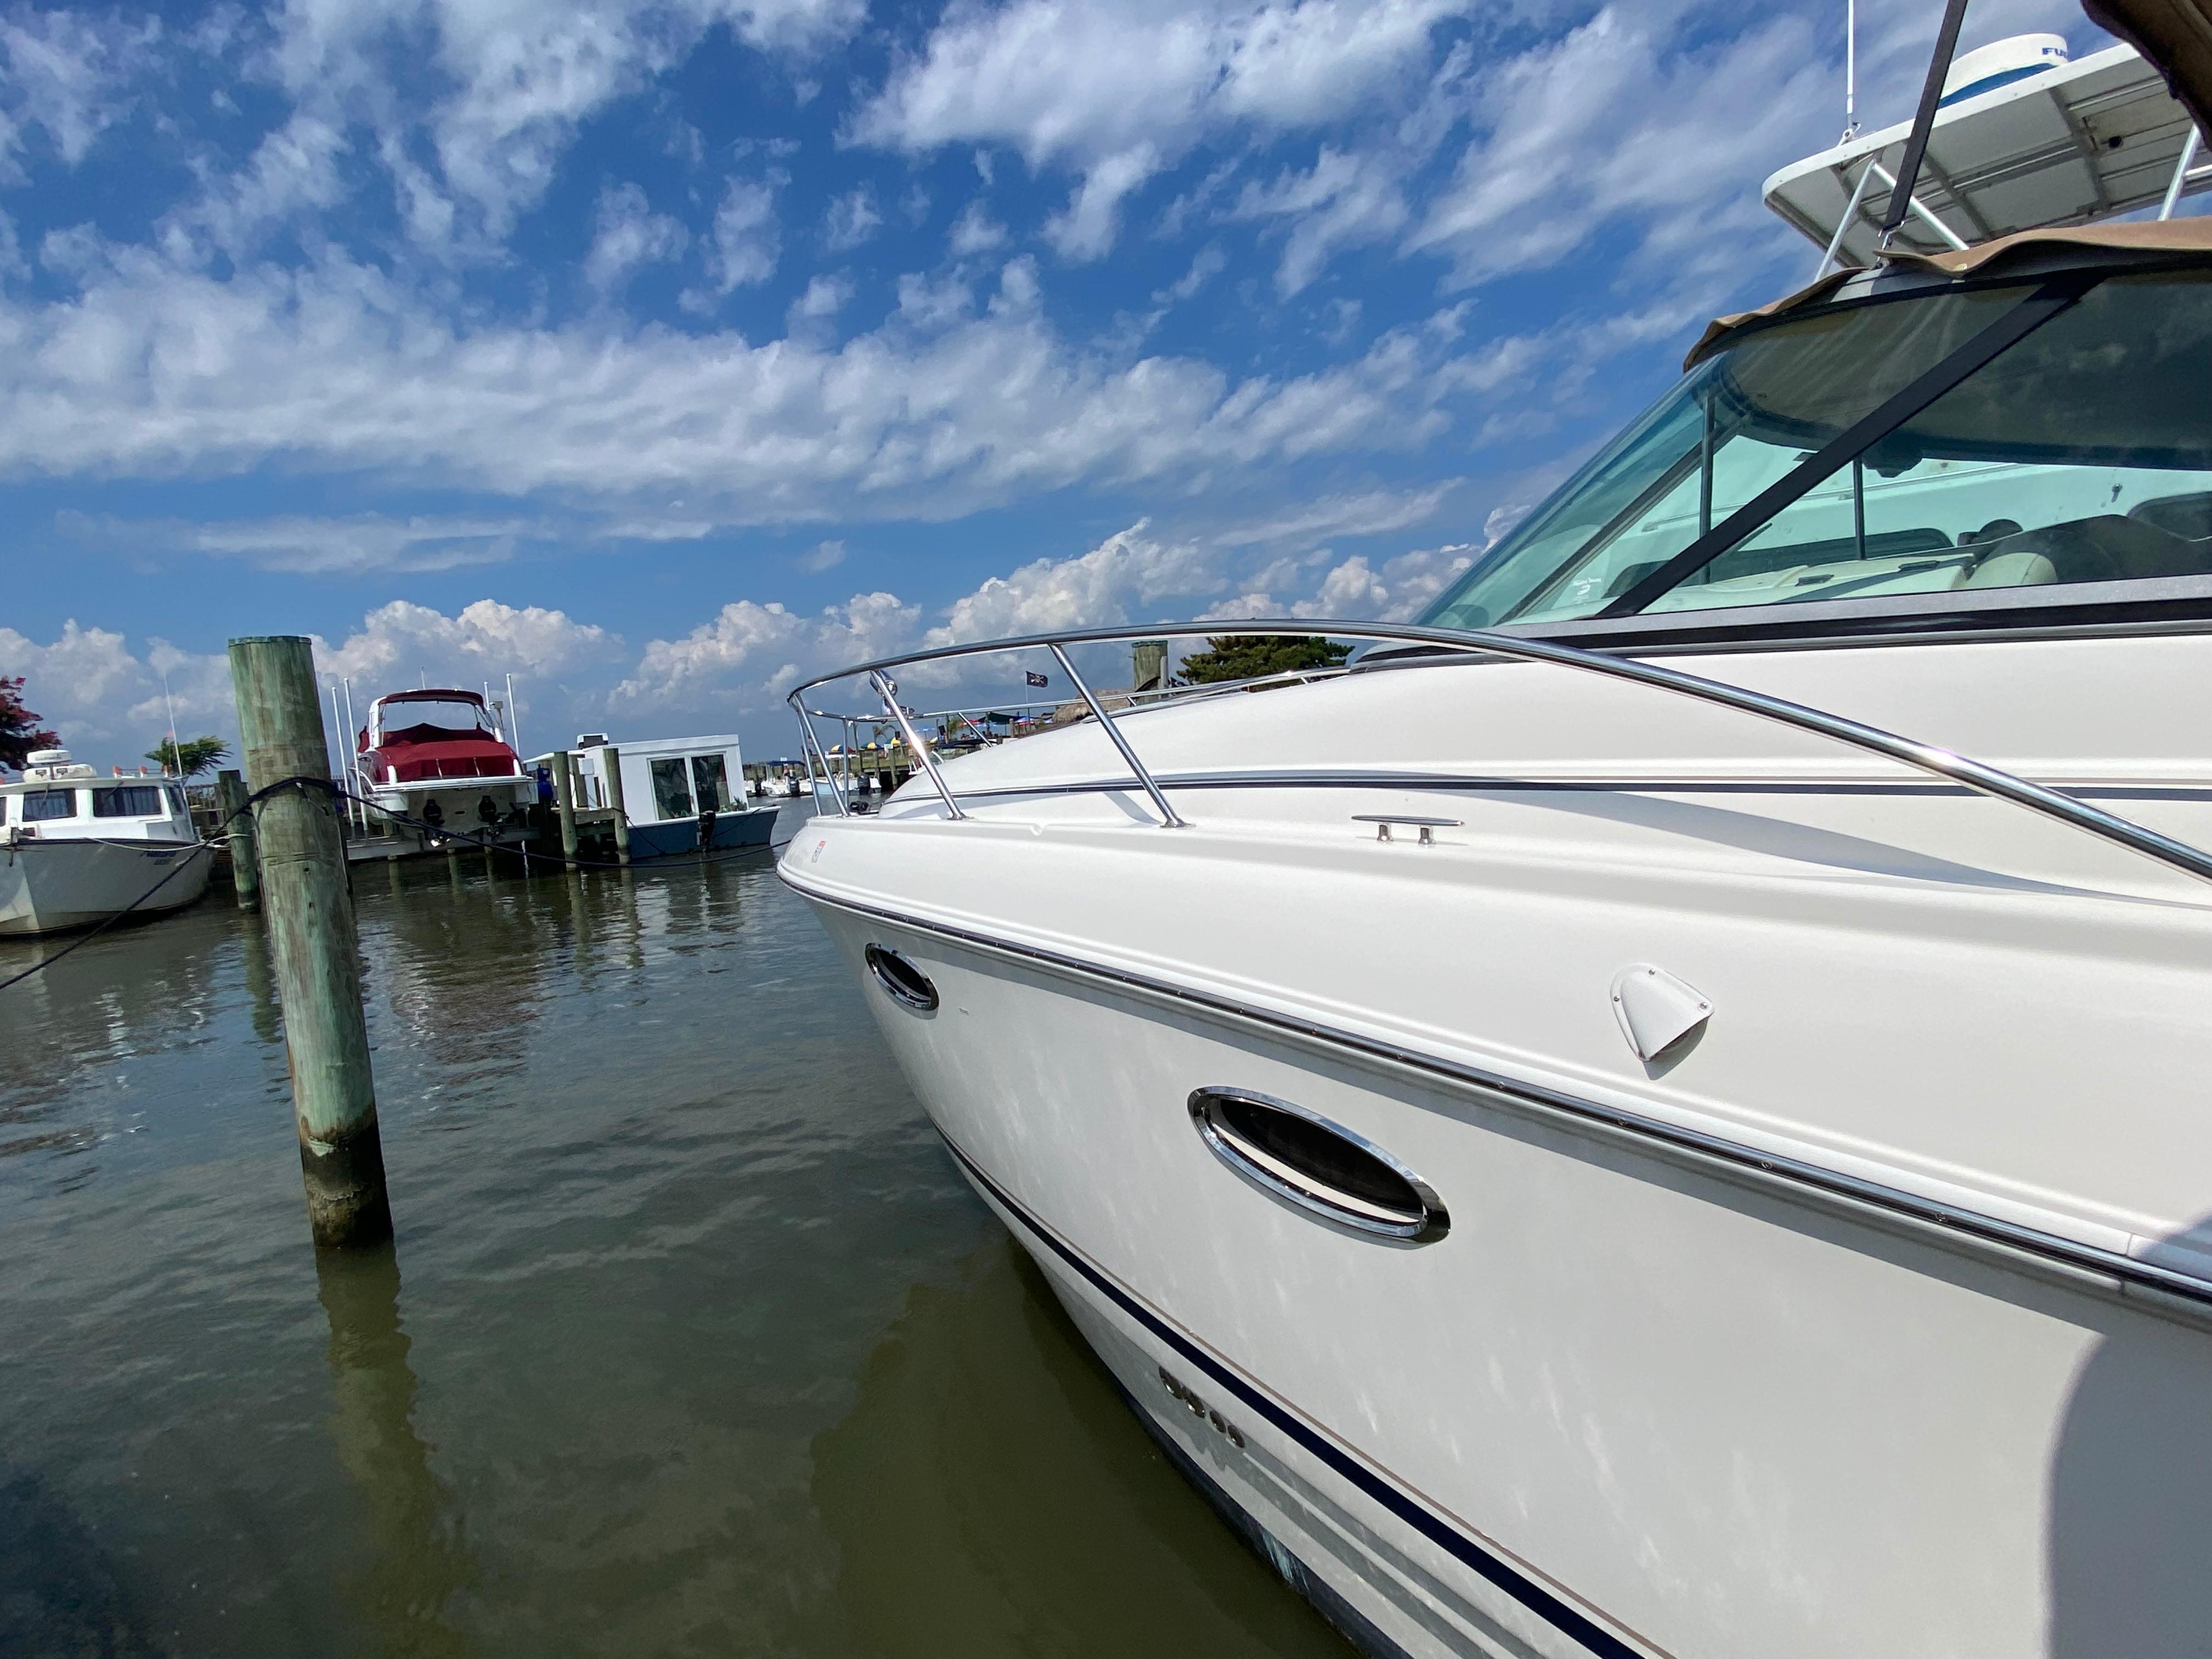 SEA SHED Yacht Brokers Of Annapolis